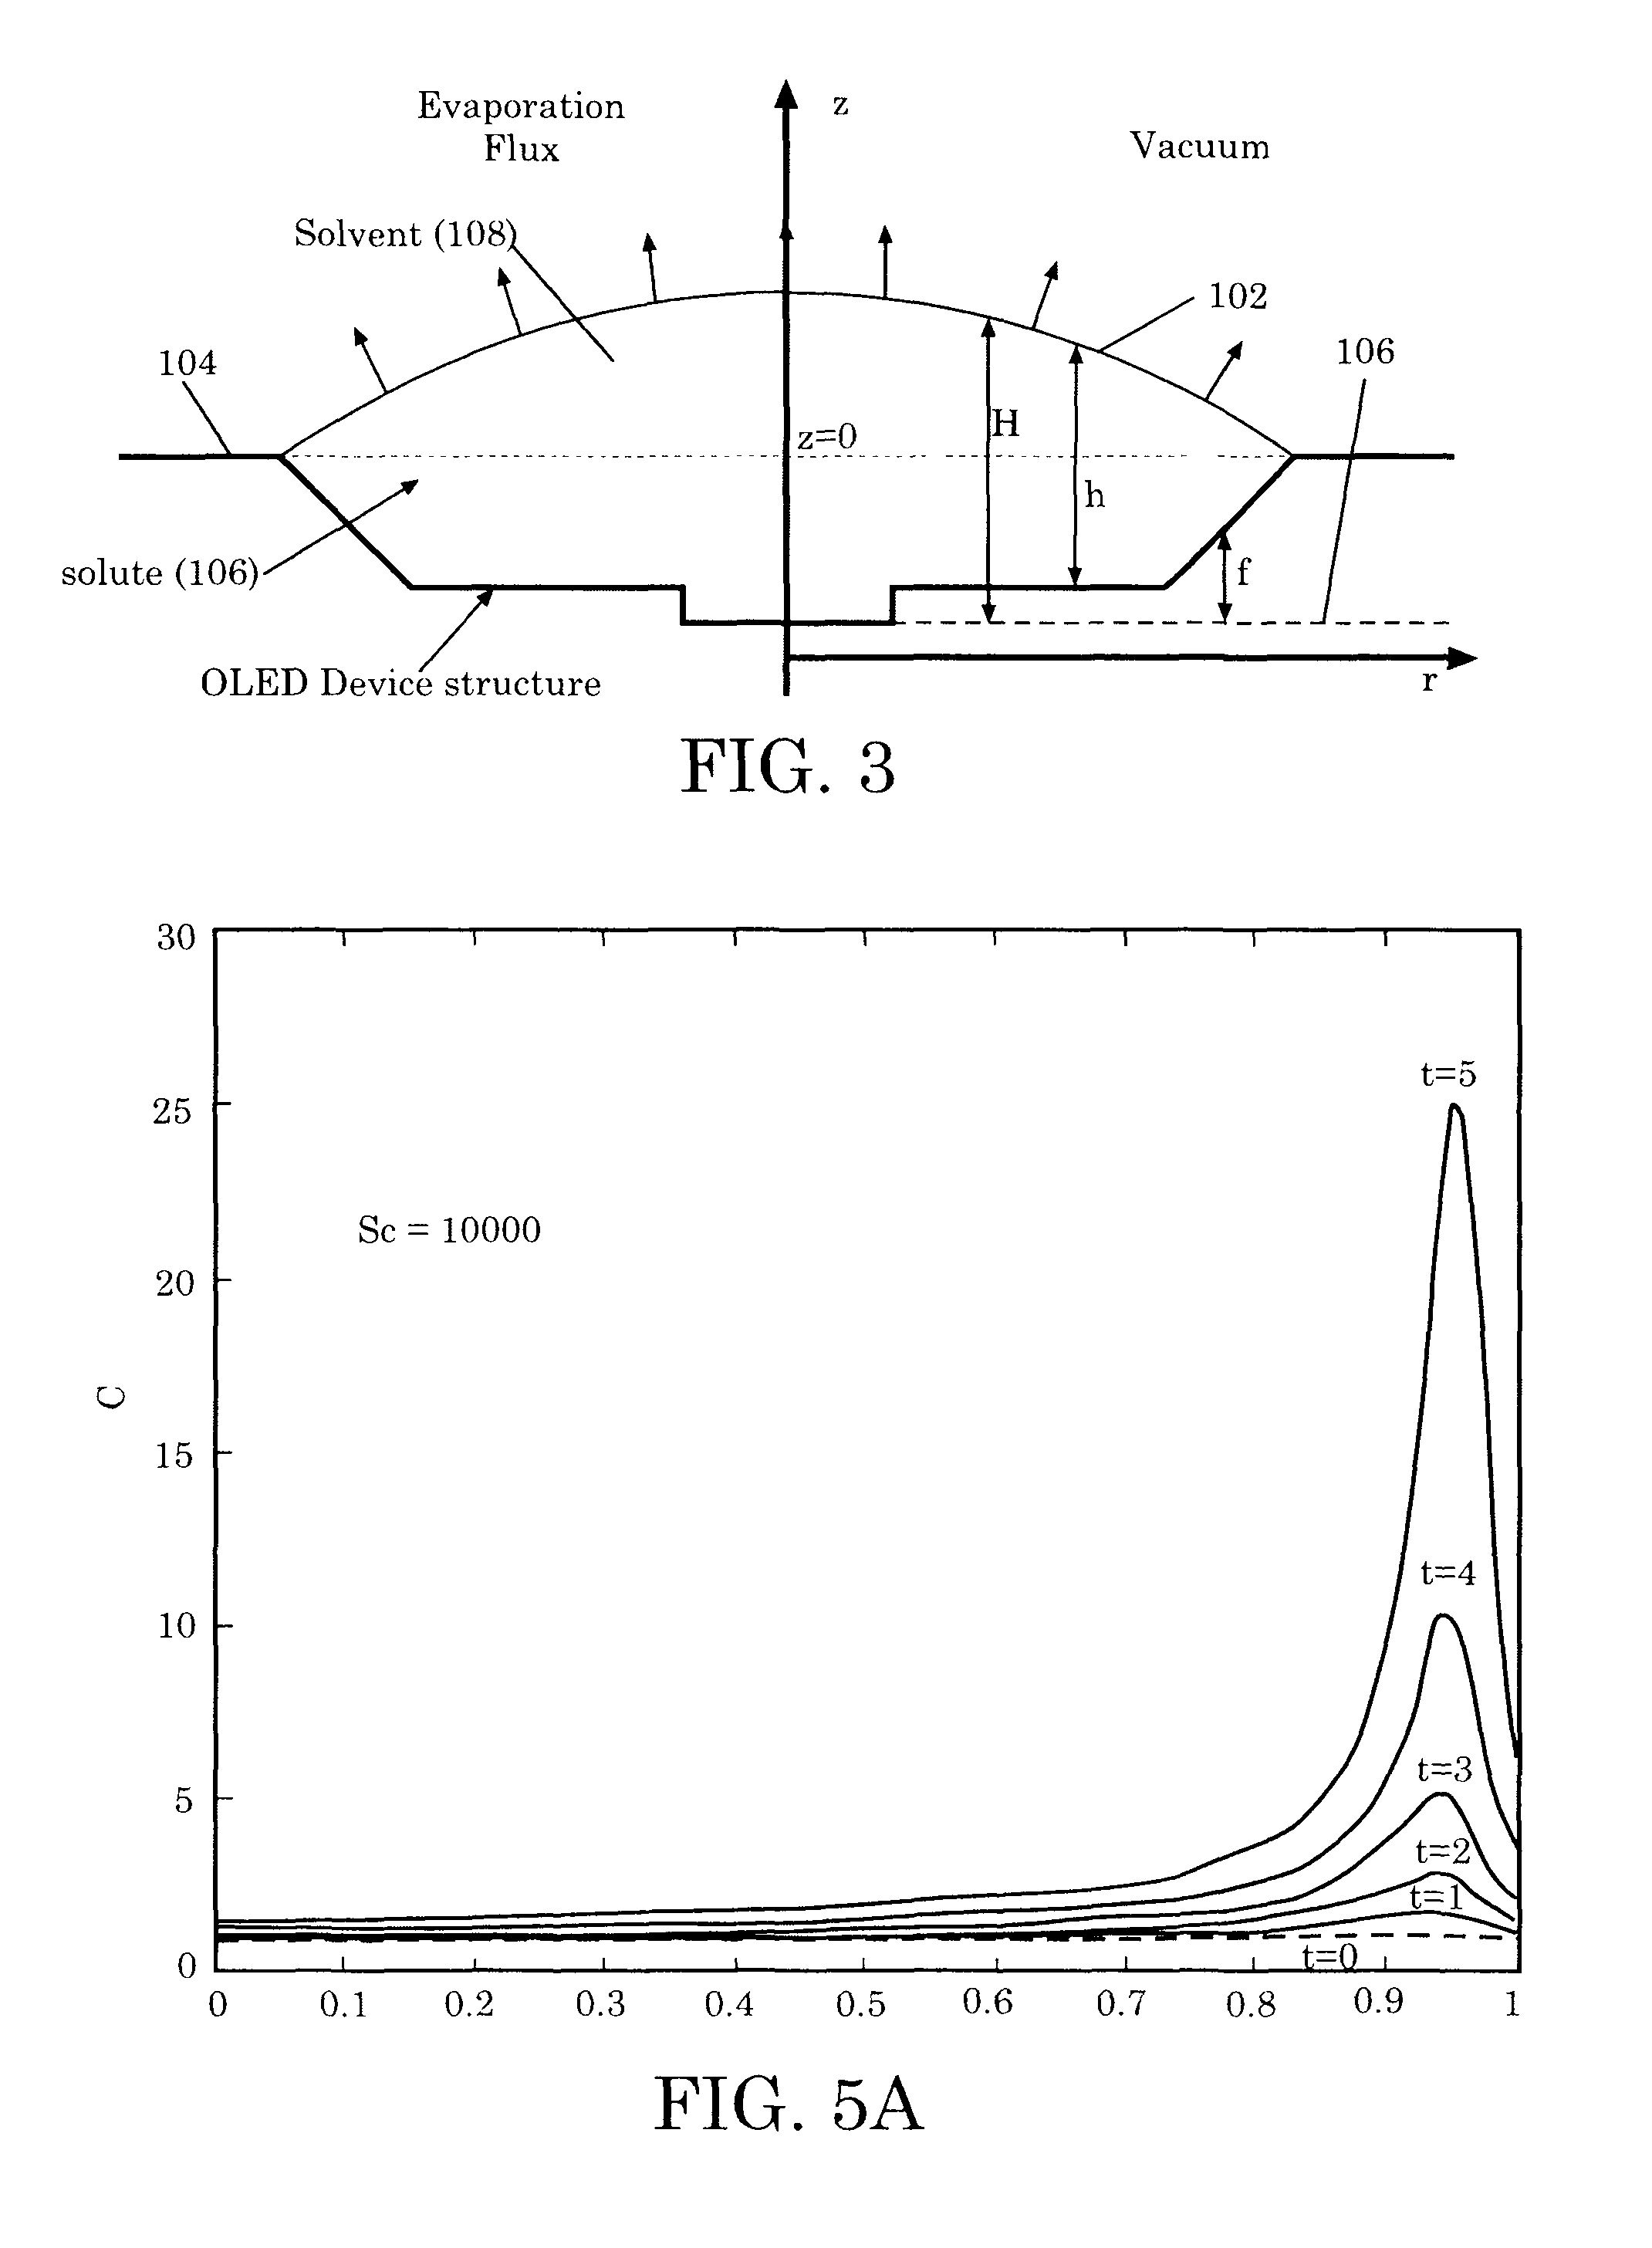 Finite difference algorithm for solving lubrication equations with solute diffusion